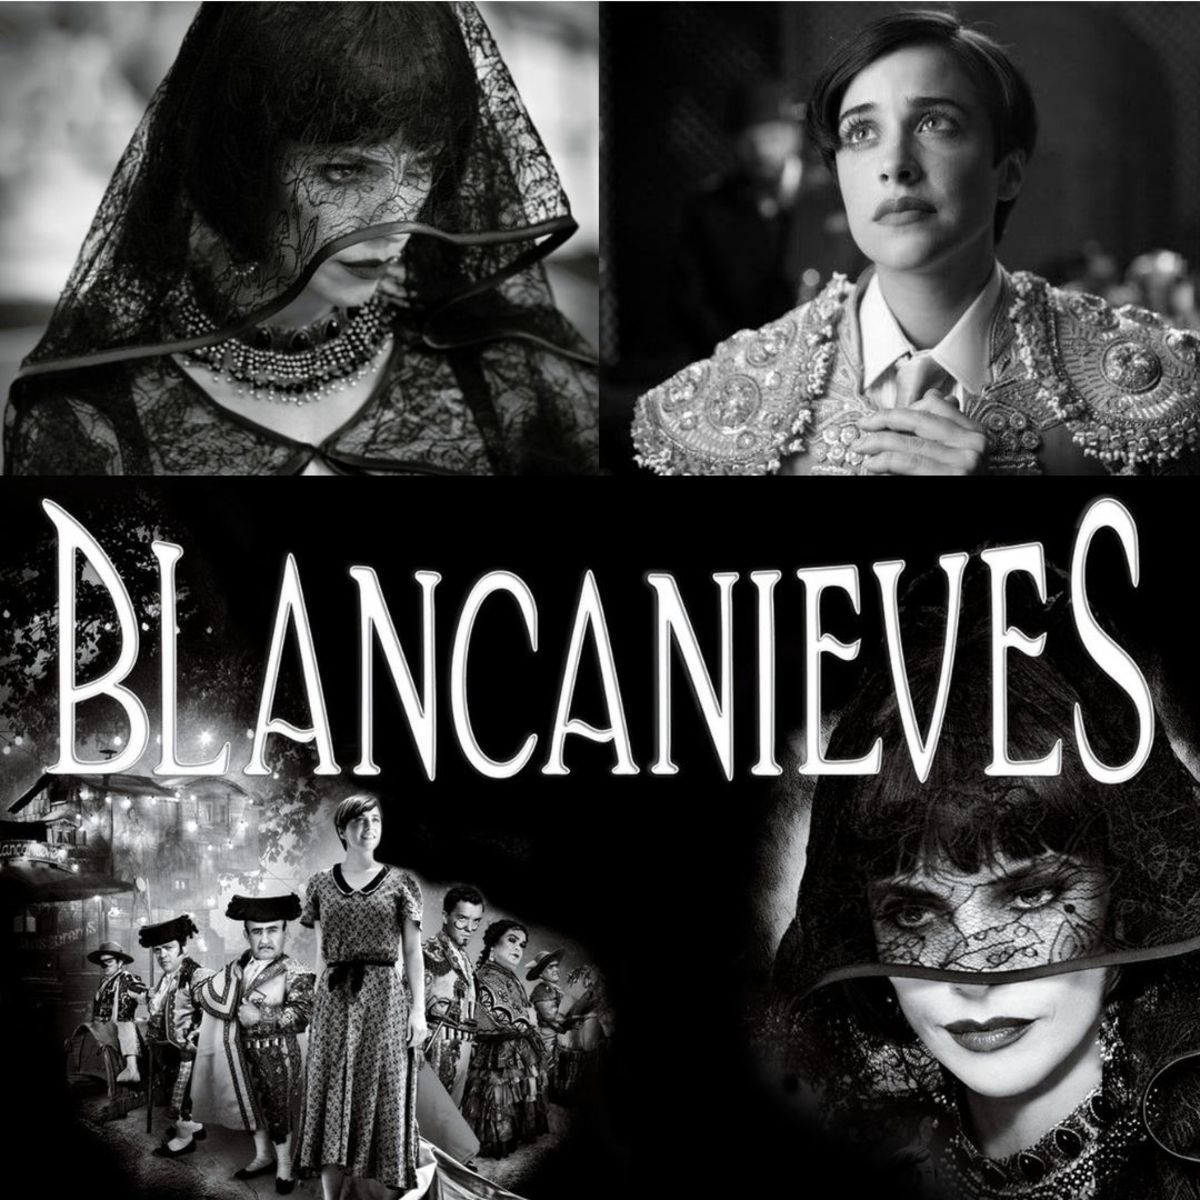 Blancanieves, the 2012 Spanish black-and-white silent film based on Snow White fairy tale